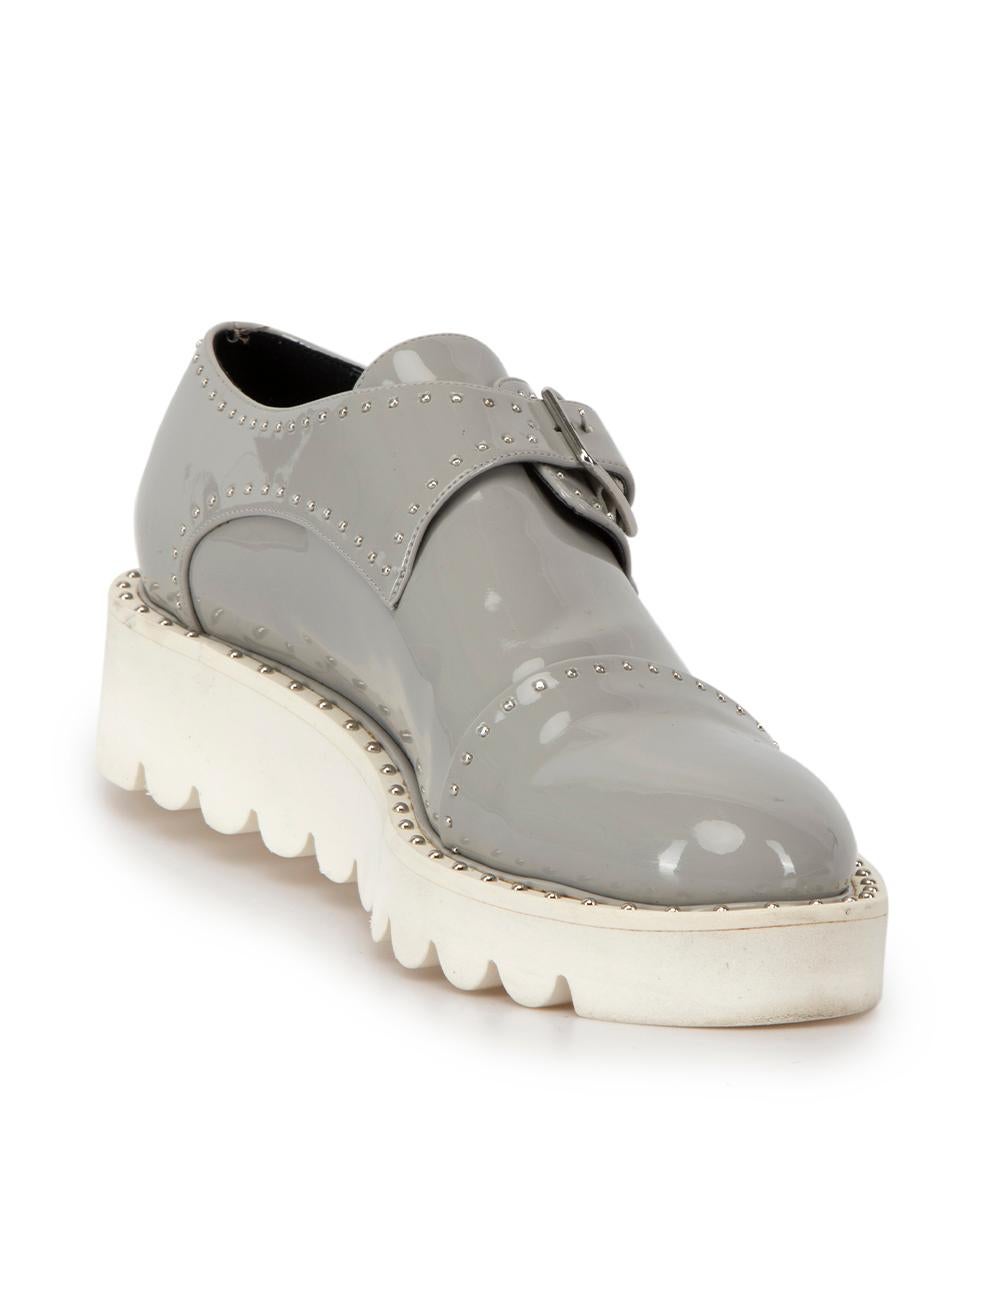 CONDITION is Very good. Minimal wear to shoes is evident. Minimal wear to the soles with scuff marks and discoloured marks by the toe studs on the left shoe on this used Stella McCartney designer resale item.
 
 Details
  Grey
 Vegan patent leather
